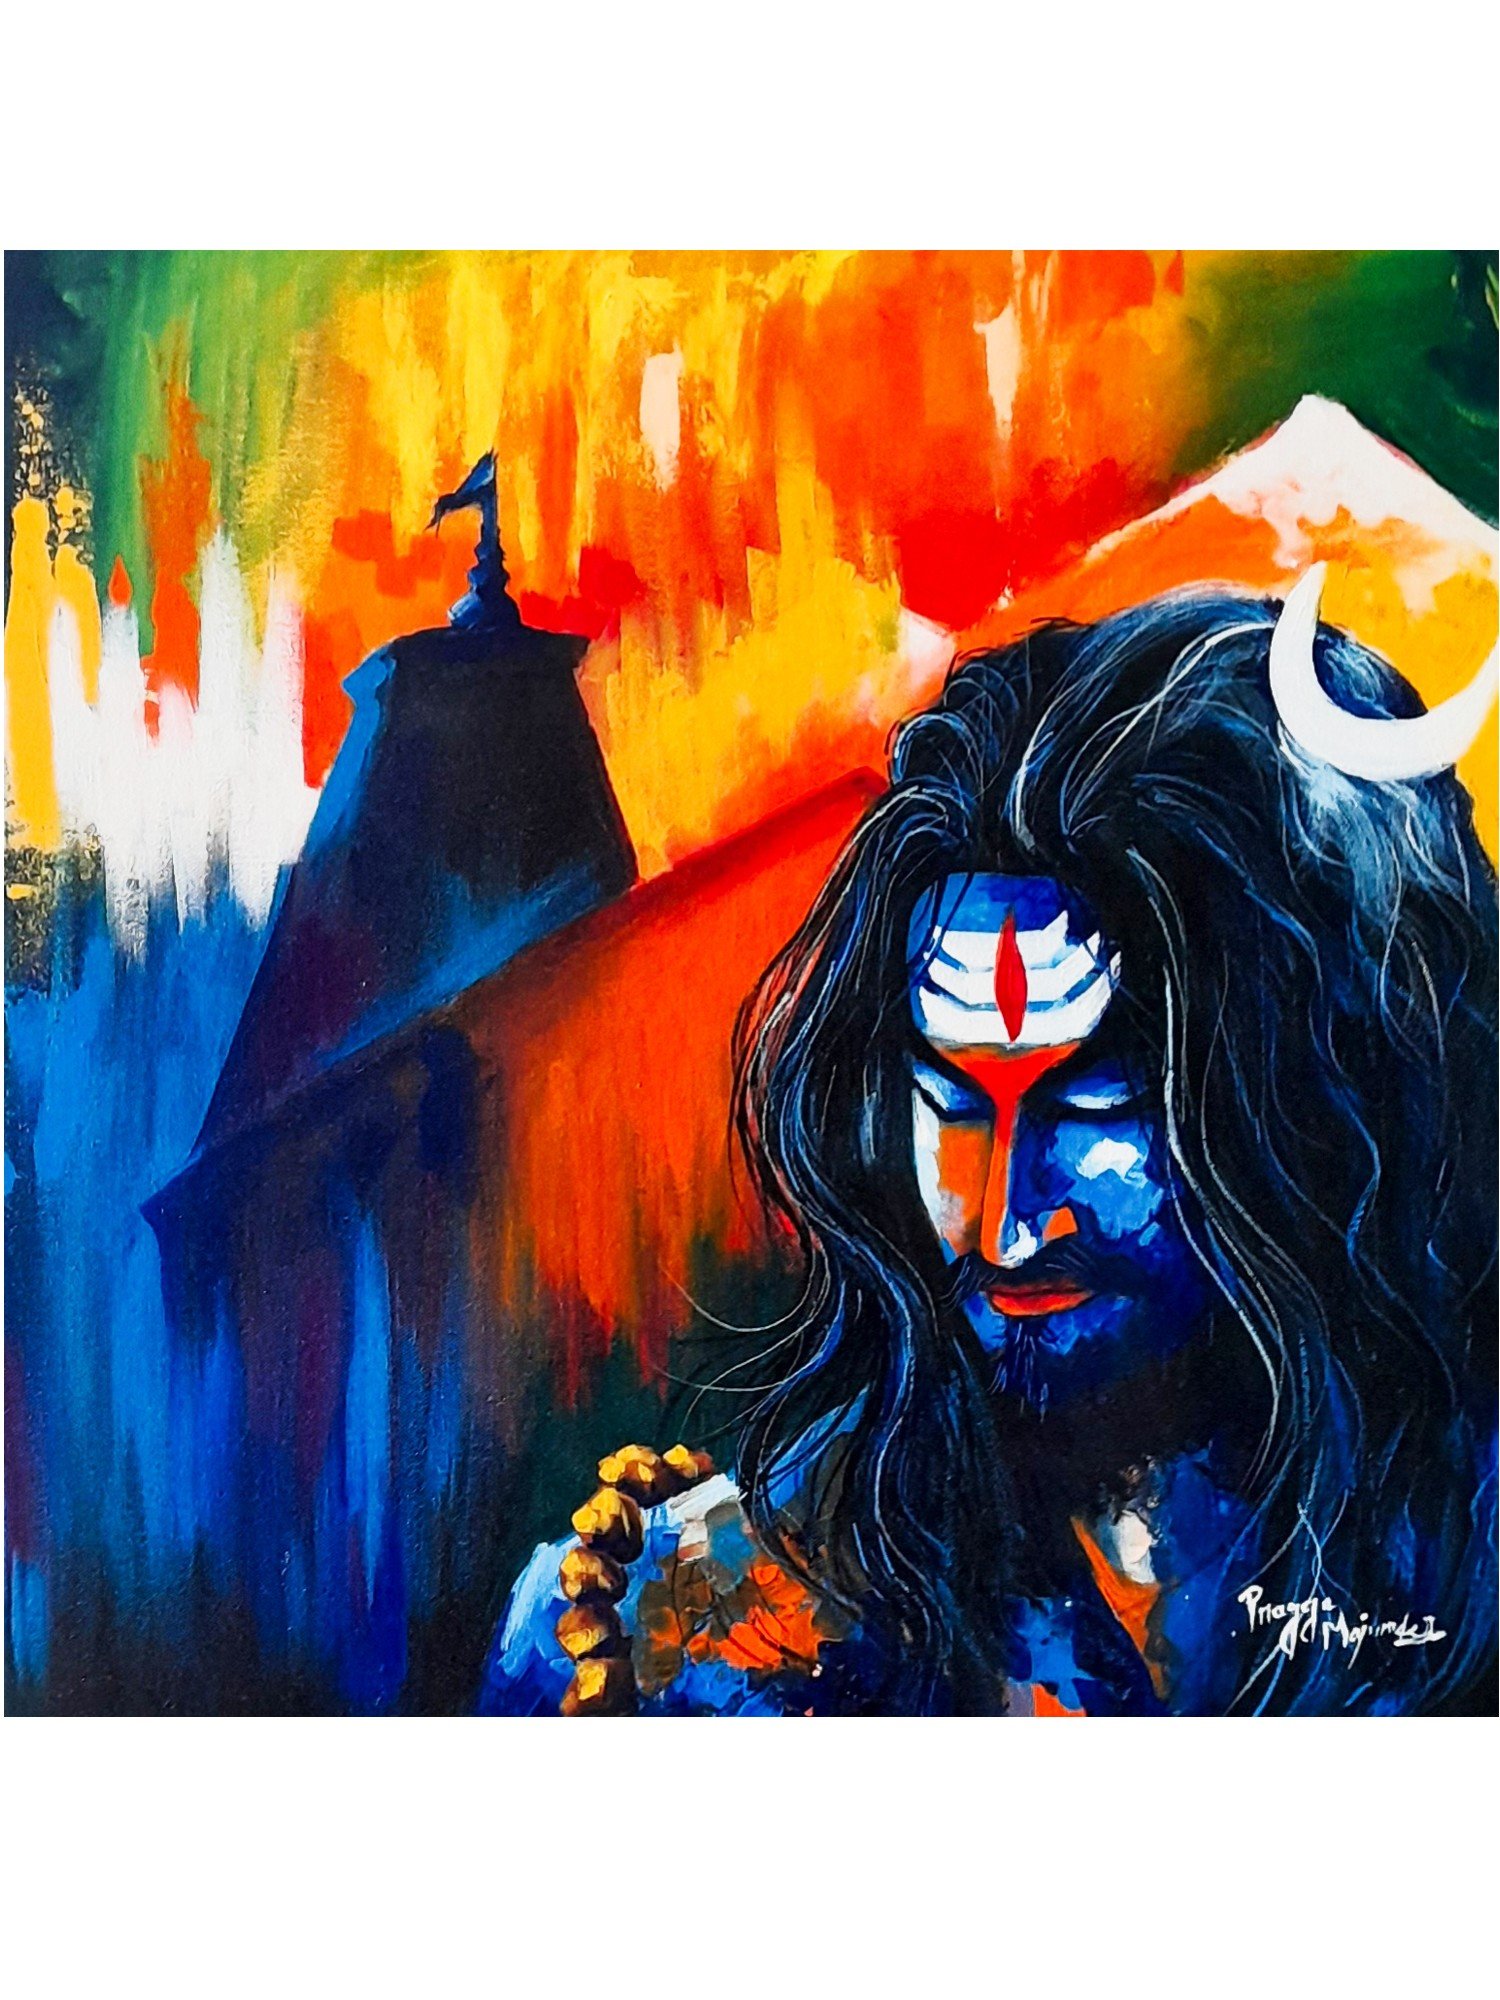 abstract paintings of lord shiva Poster Paper Print - Abstract posters in  India - Buy art, film, design, movie, music, nature and educational  paintings/wallpapers at Flipkart.com